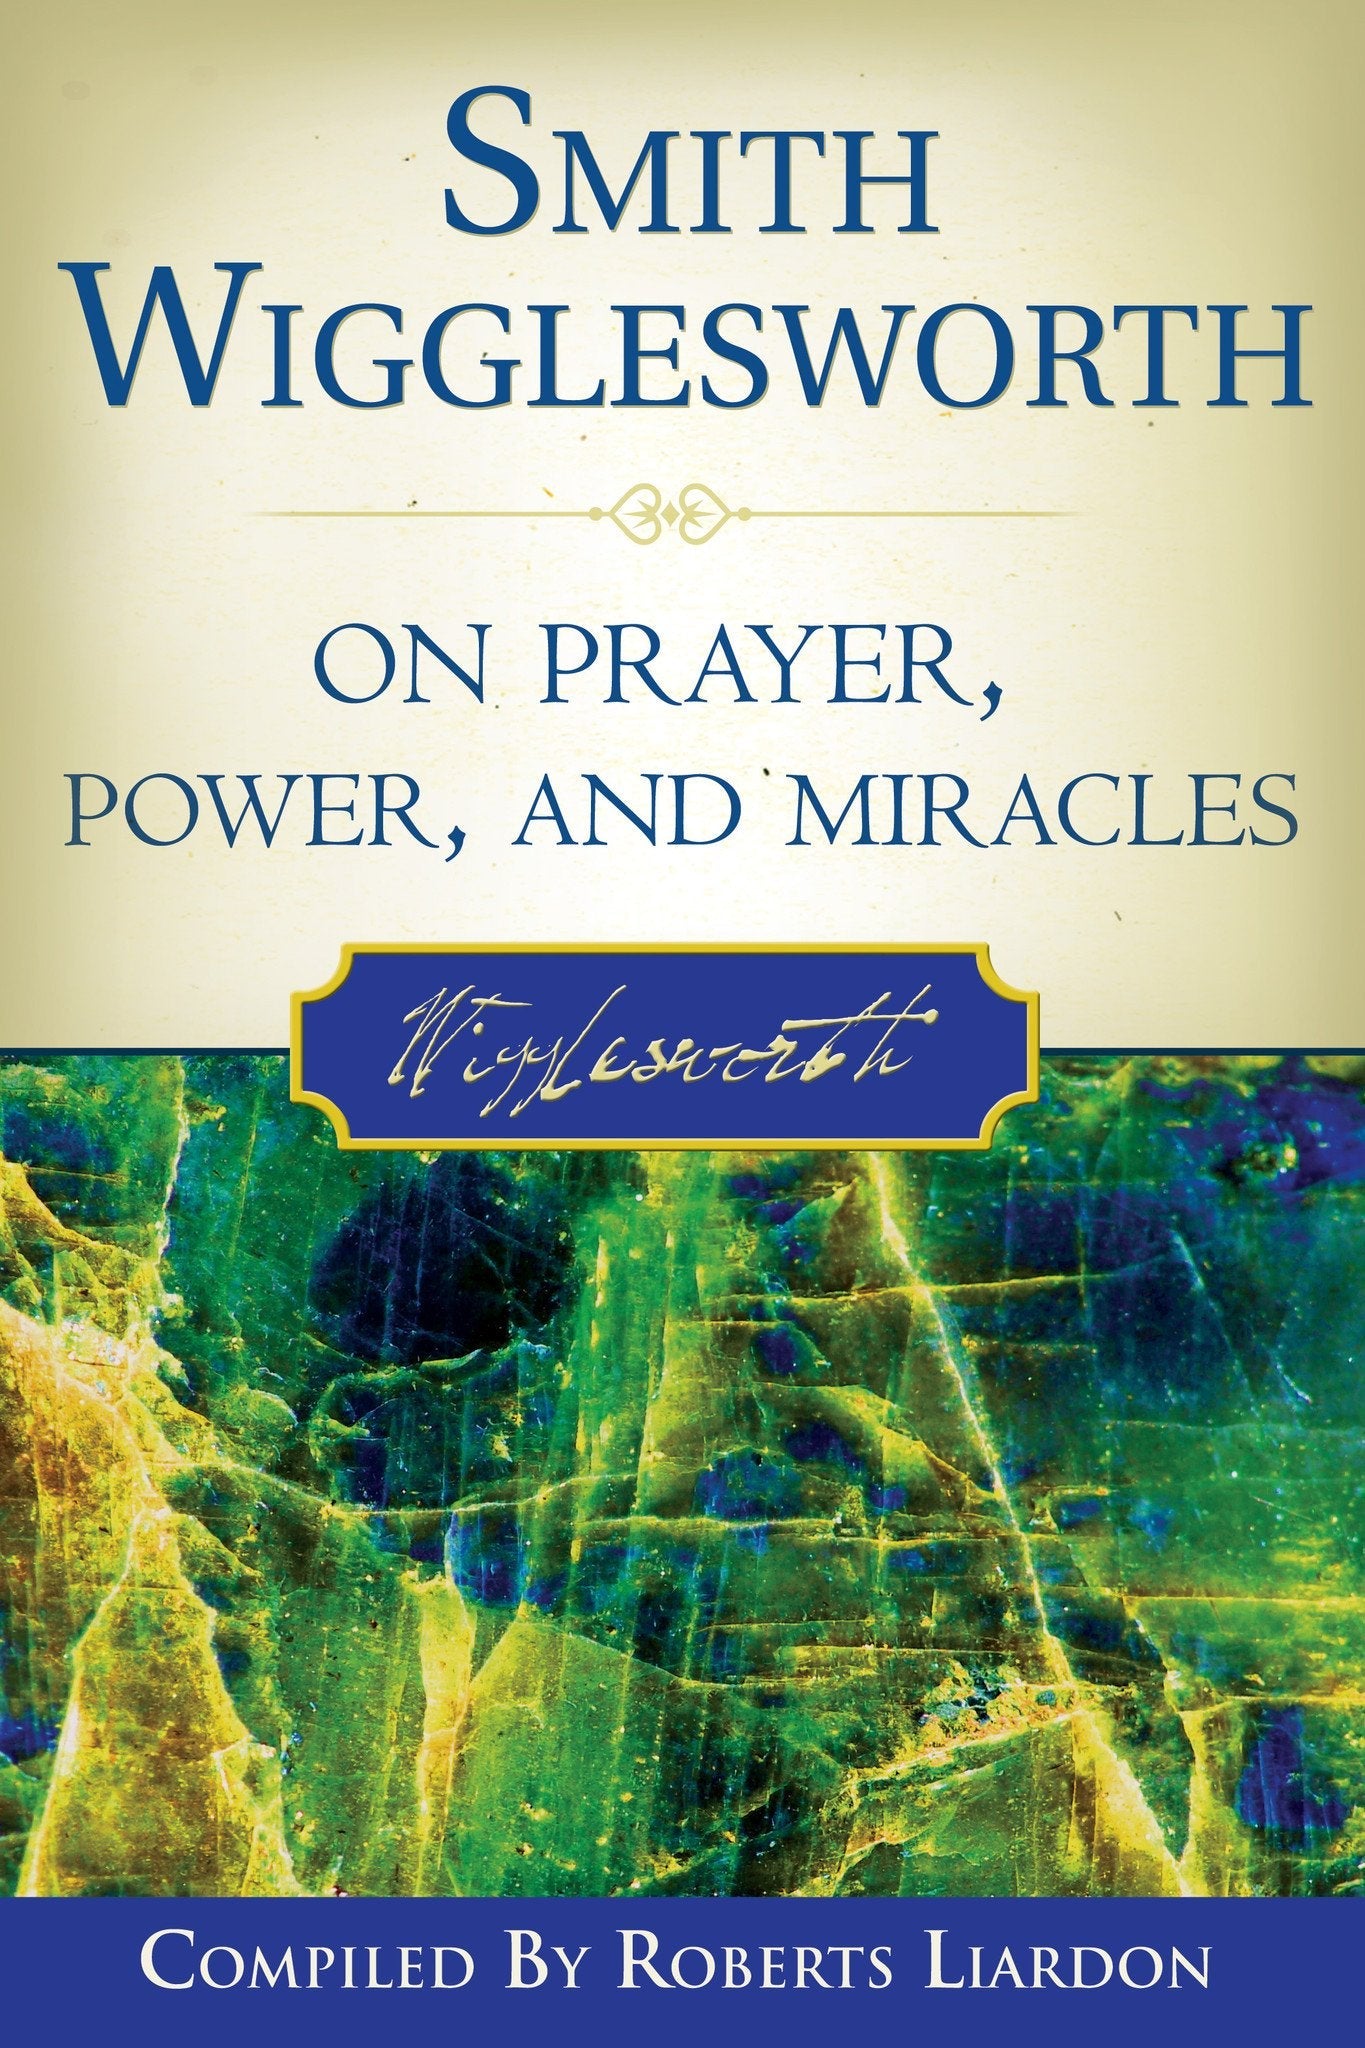 Smith Wigglesworth on Prayer, Power, and Miracles